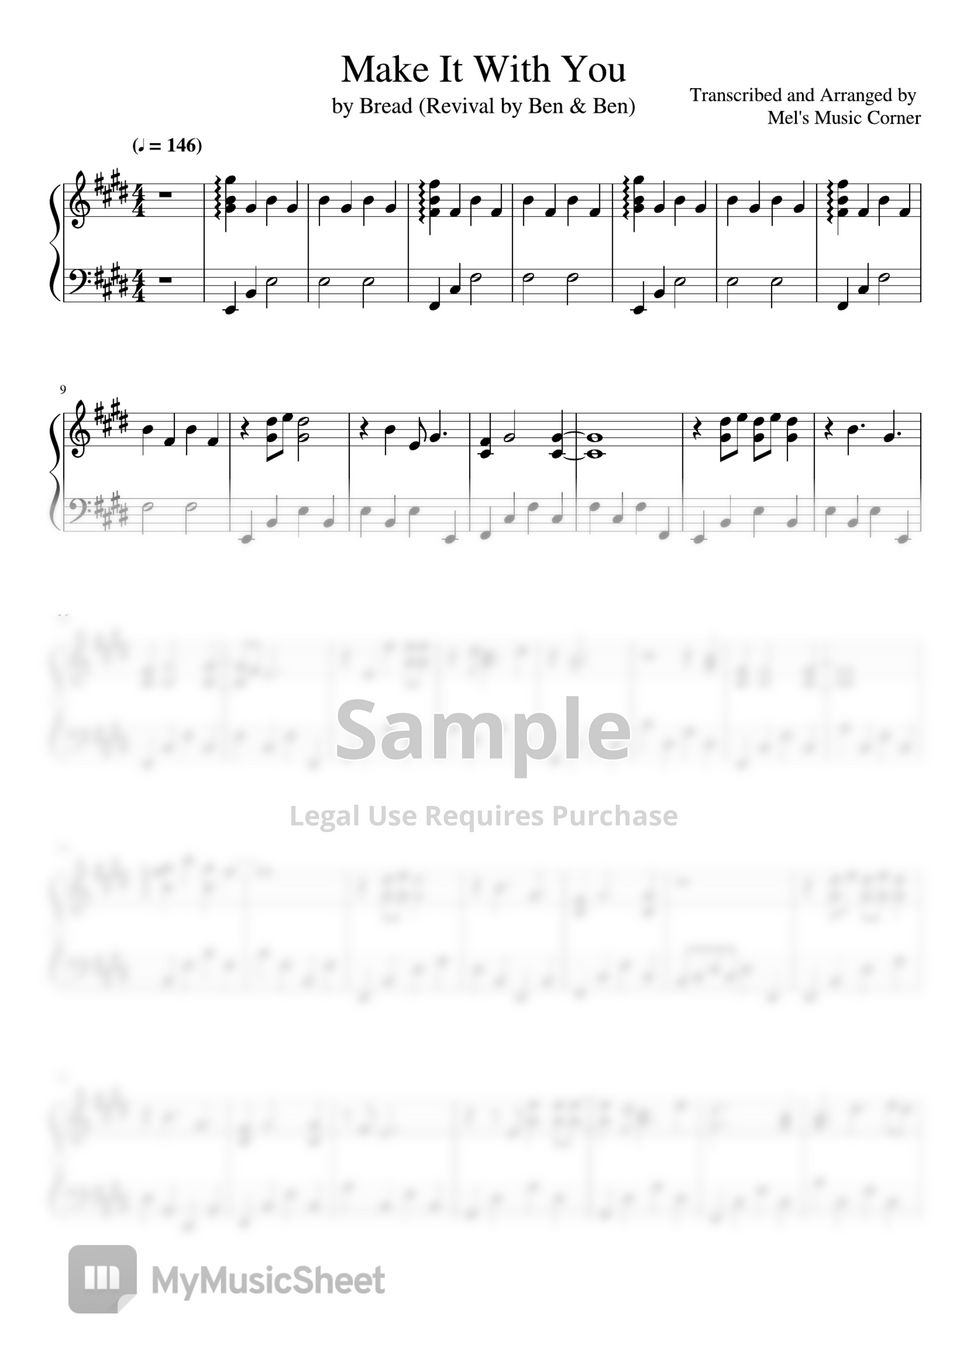 Bread (Ben&Ben Version) - Make it With You (piano sheet music) by Mel's Music Corner